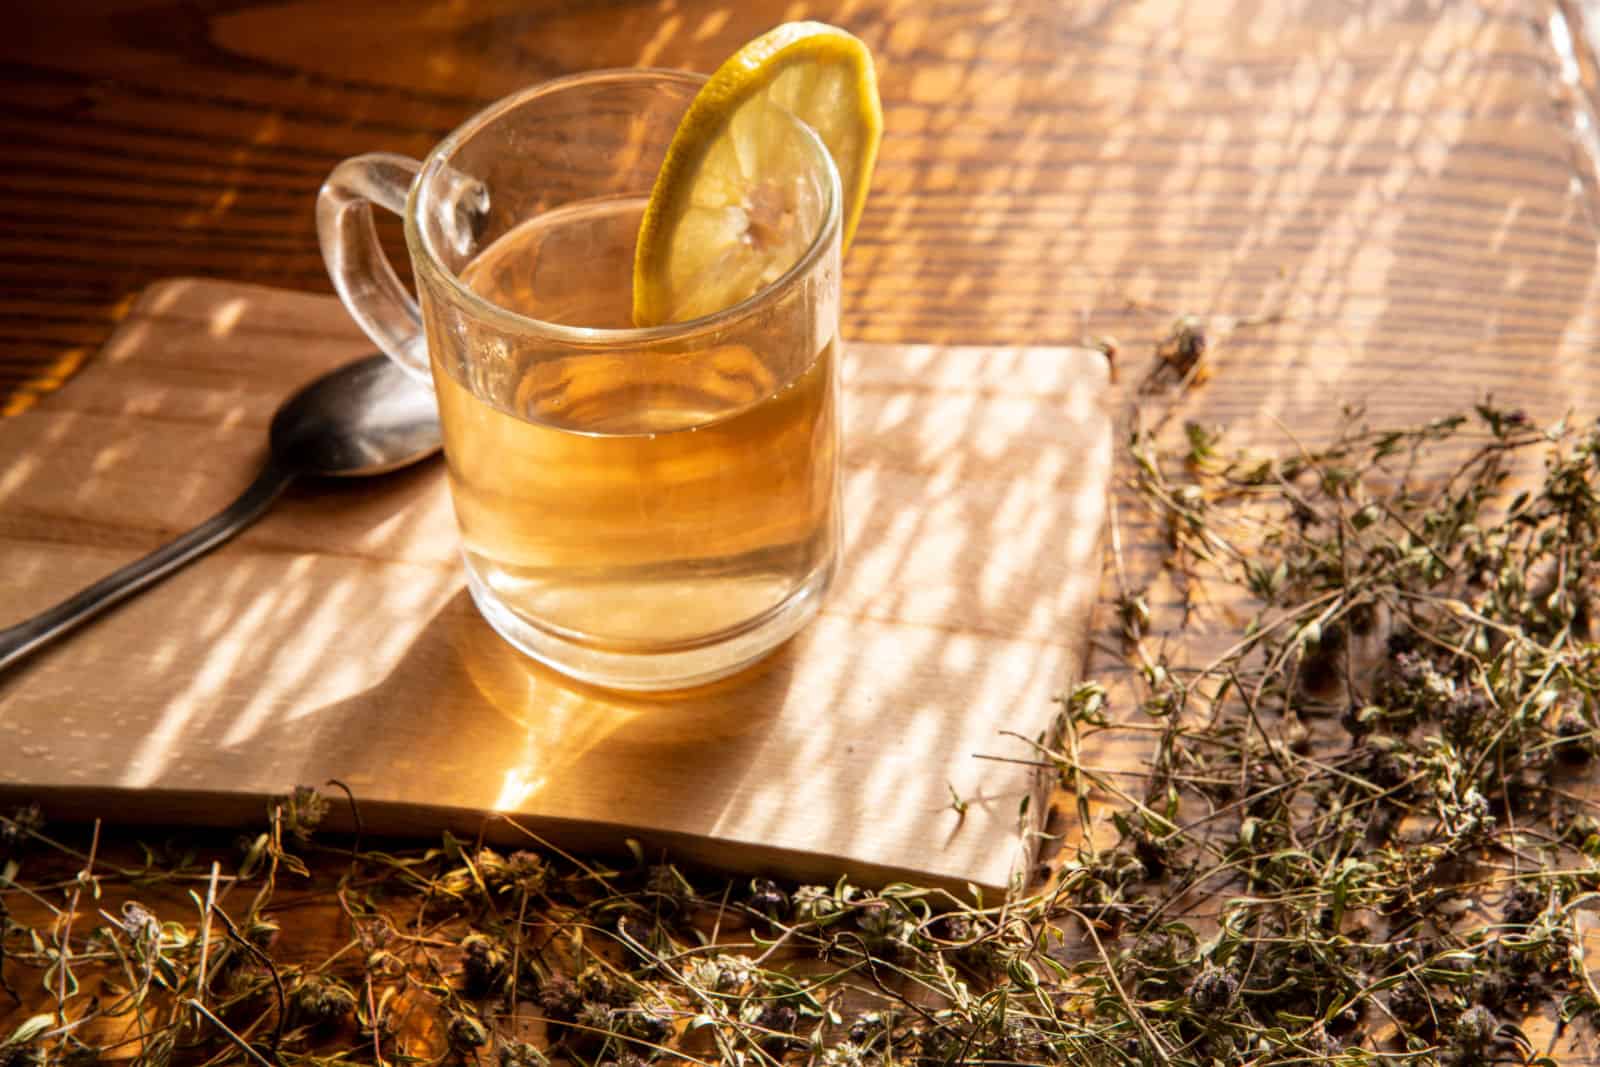 A cup of creeping thyme (thymus serpyllum) tea, with dry creeping thyme twigs on a wooden background